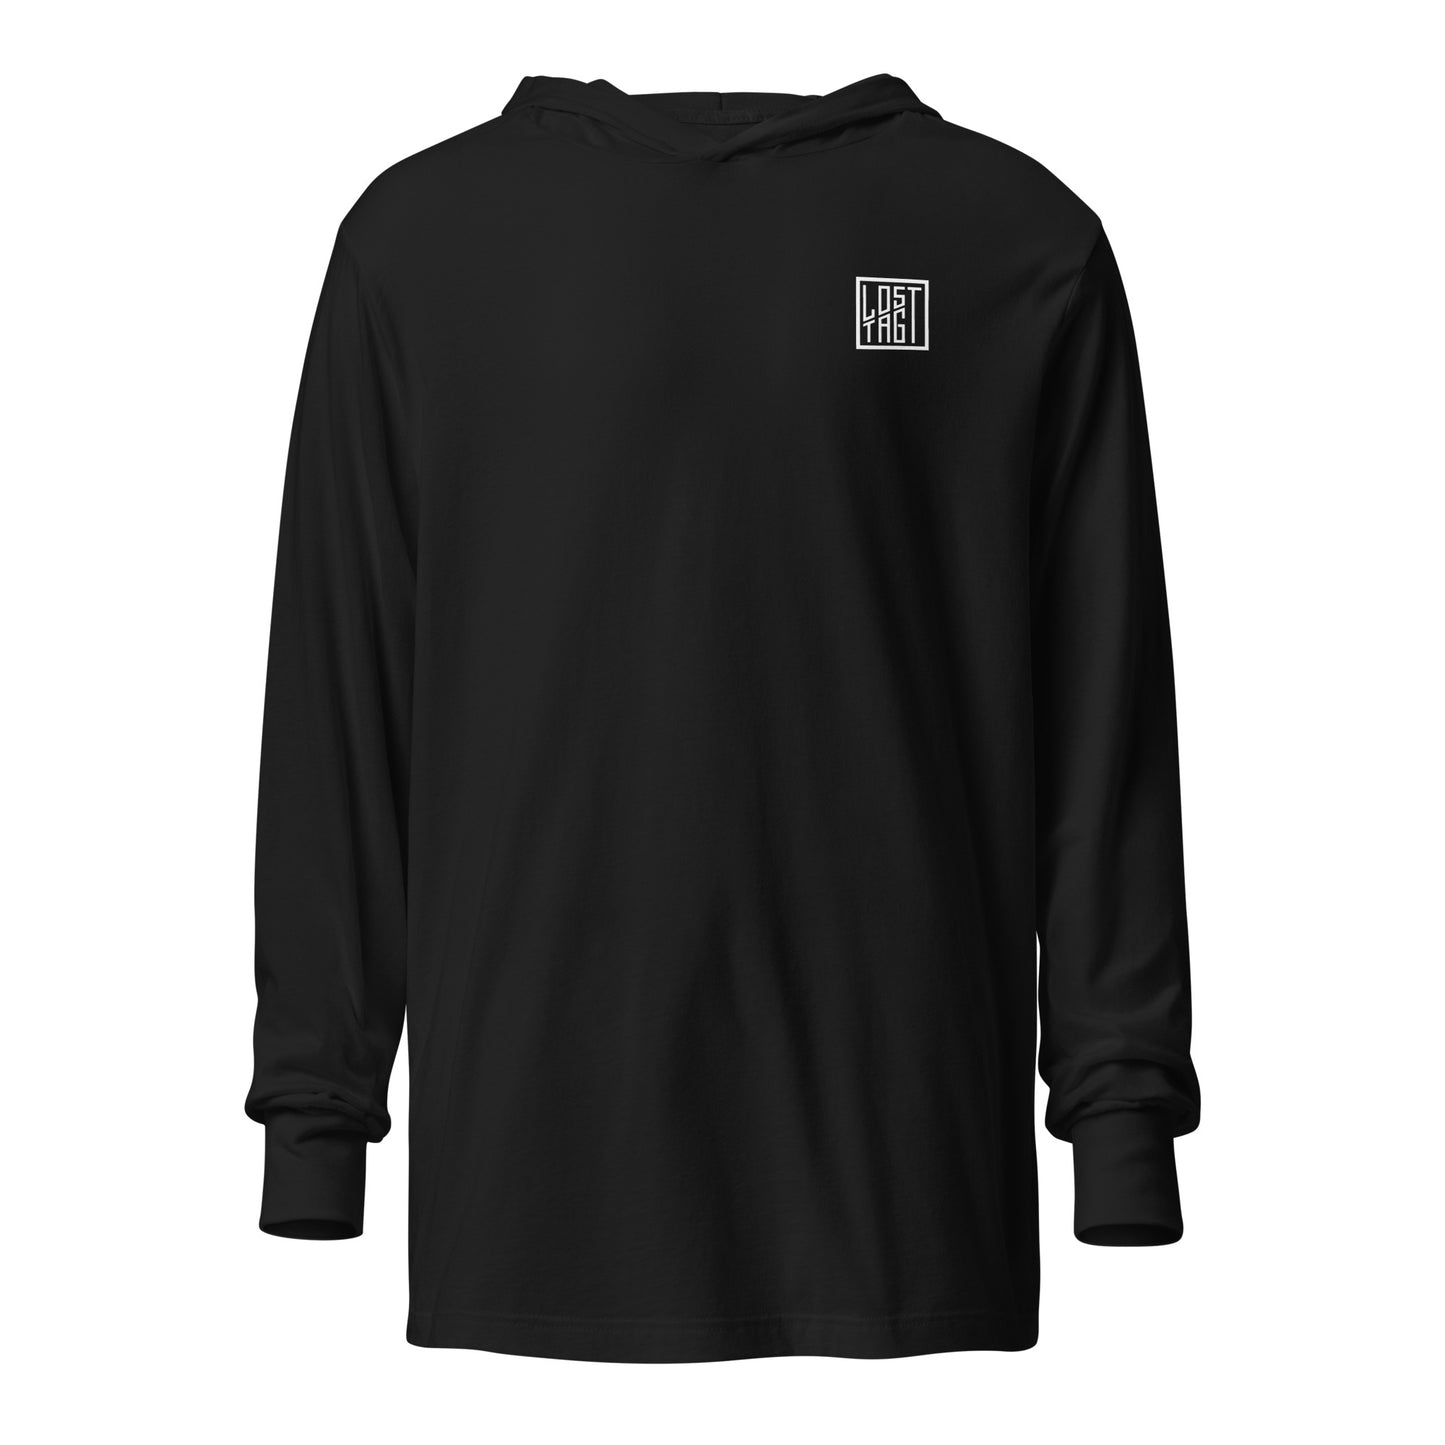 Not Today, Death hooded long-sleeve tee